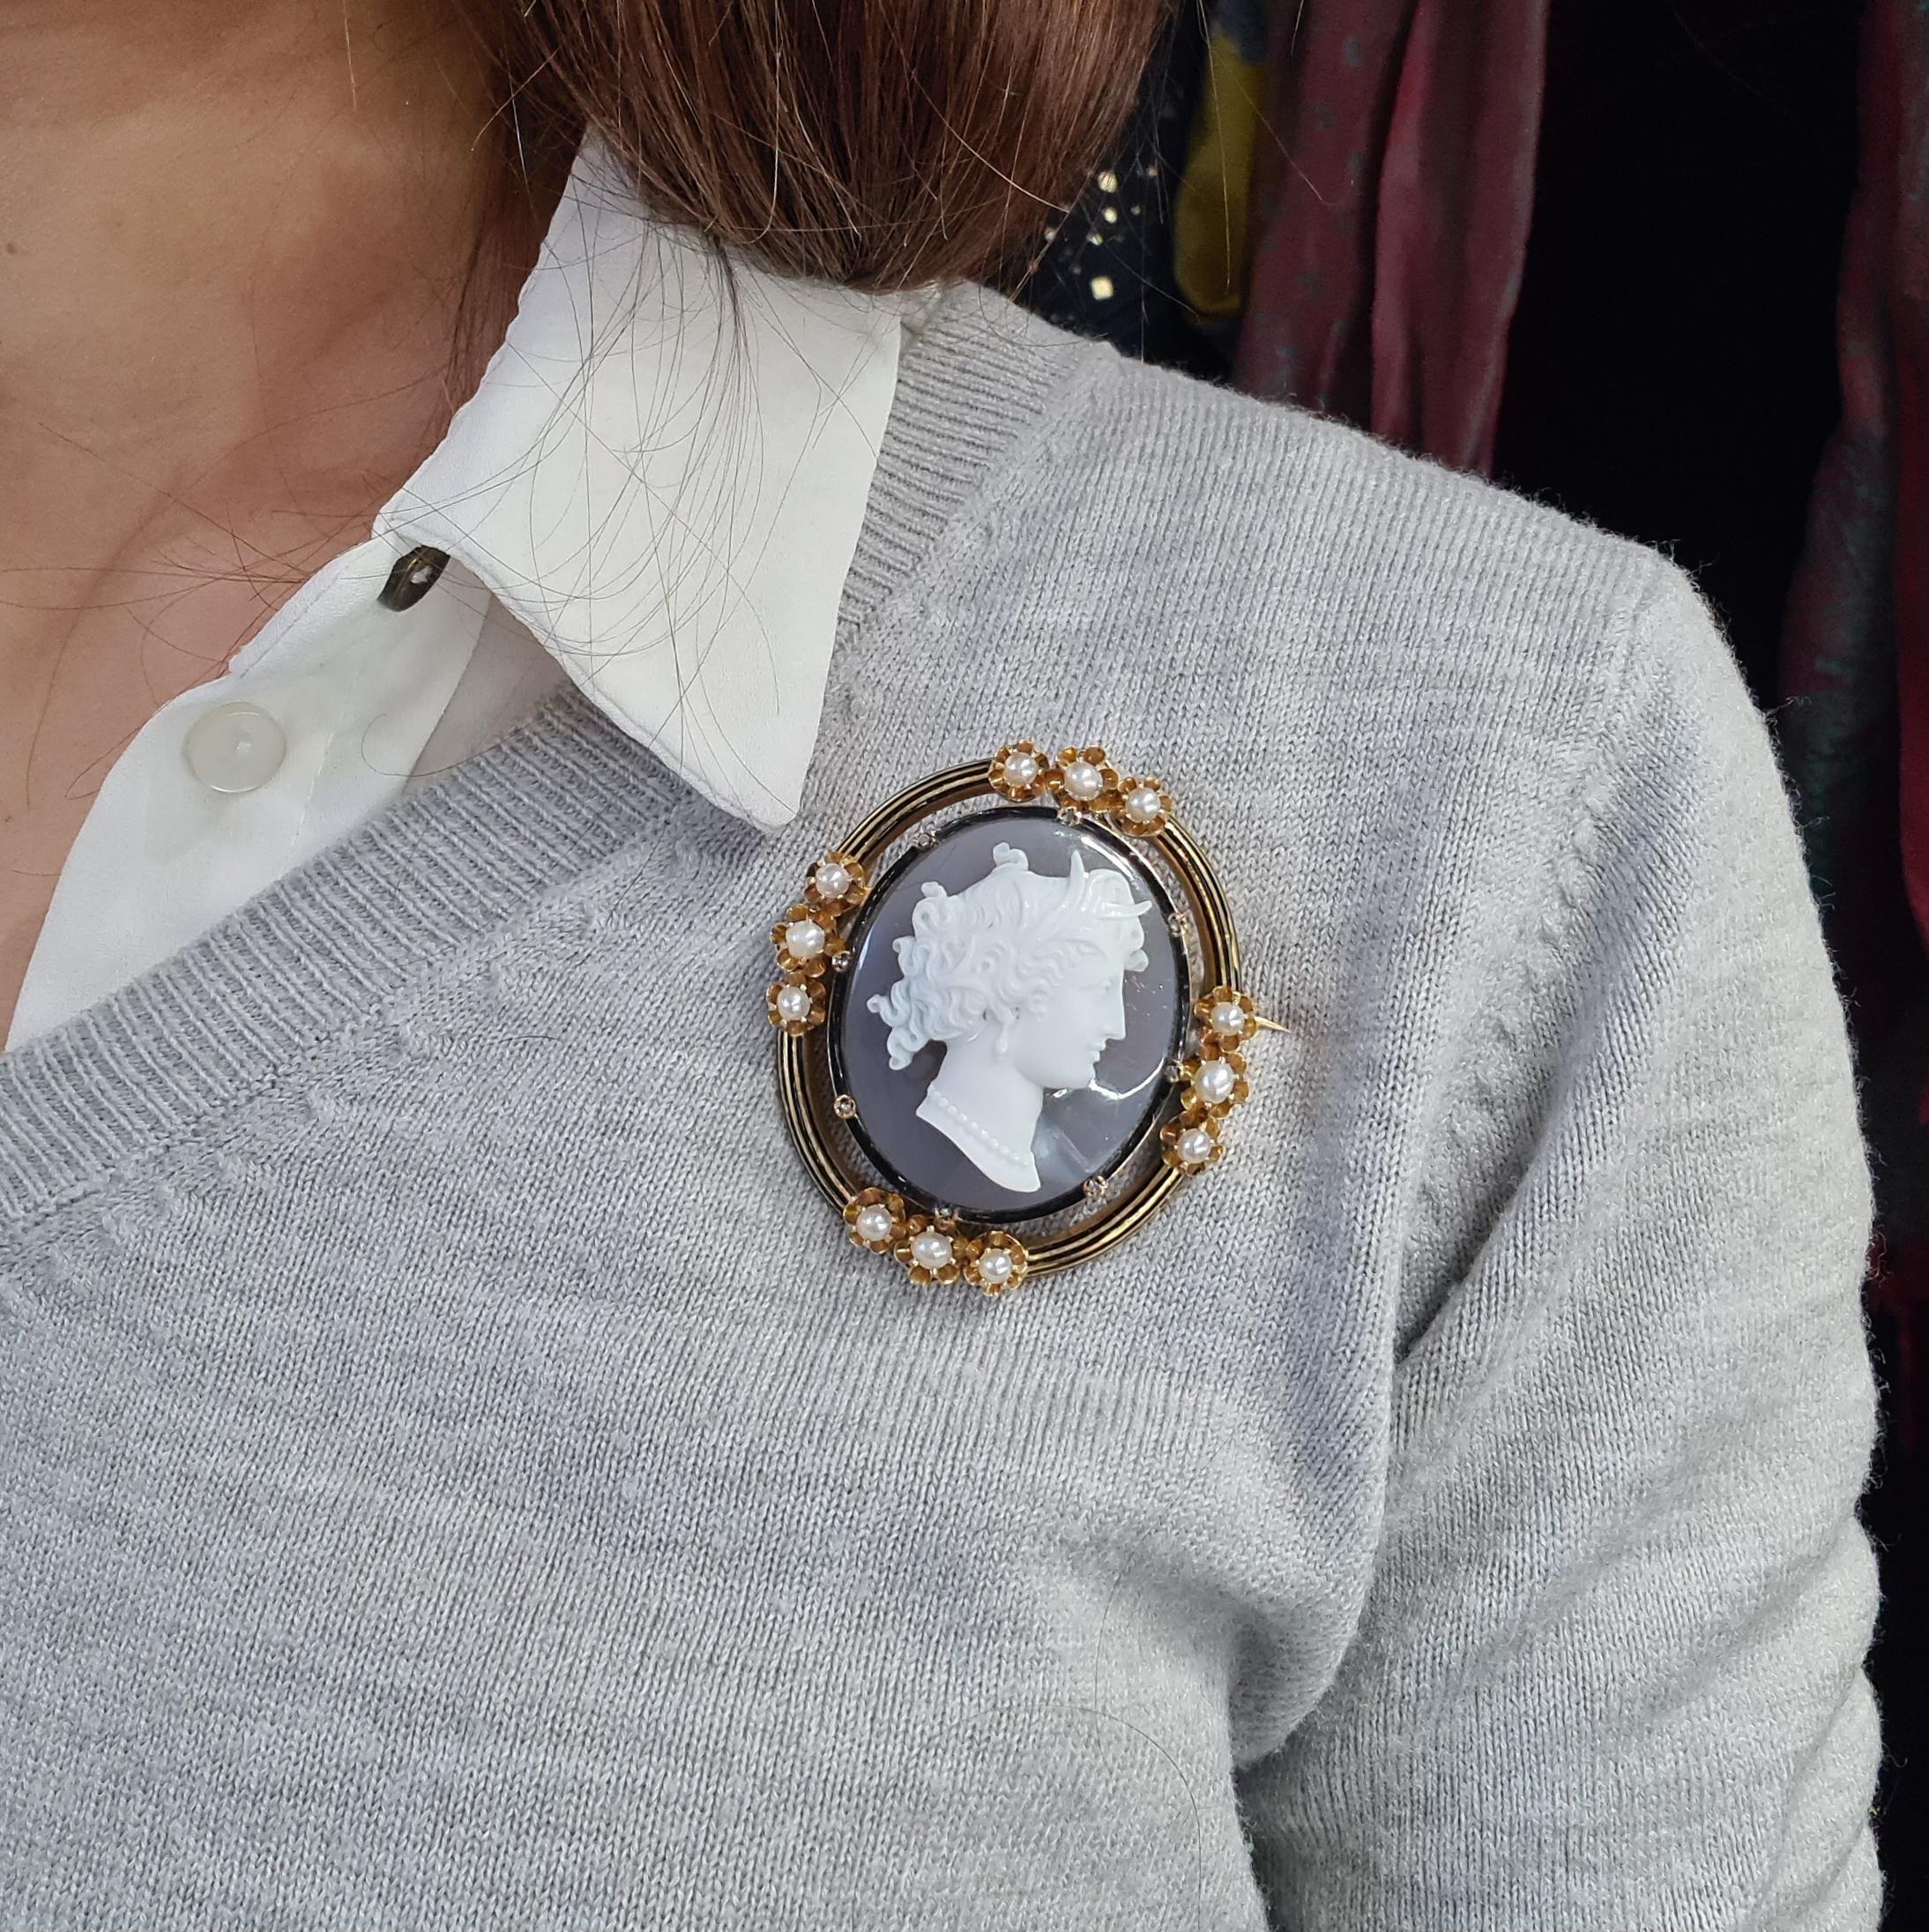 A hard stone cameo brooch, set with a cameo of a Roman woman's head, carved in high relief, onto a grey background, in a gold frame with a black enamelled surround, set with natural half pearls and rose-cut diamonds. With a French eagle marks for